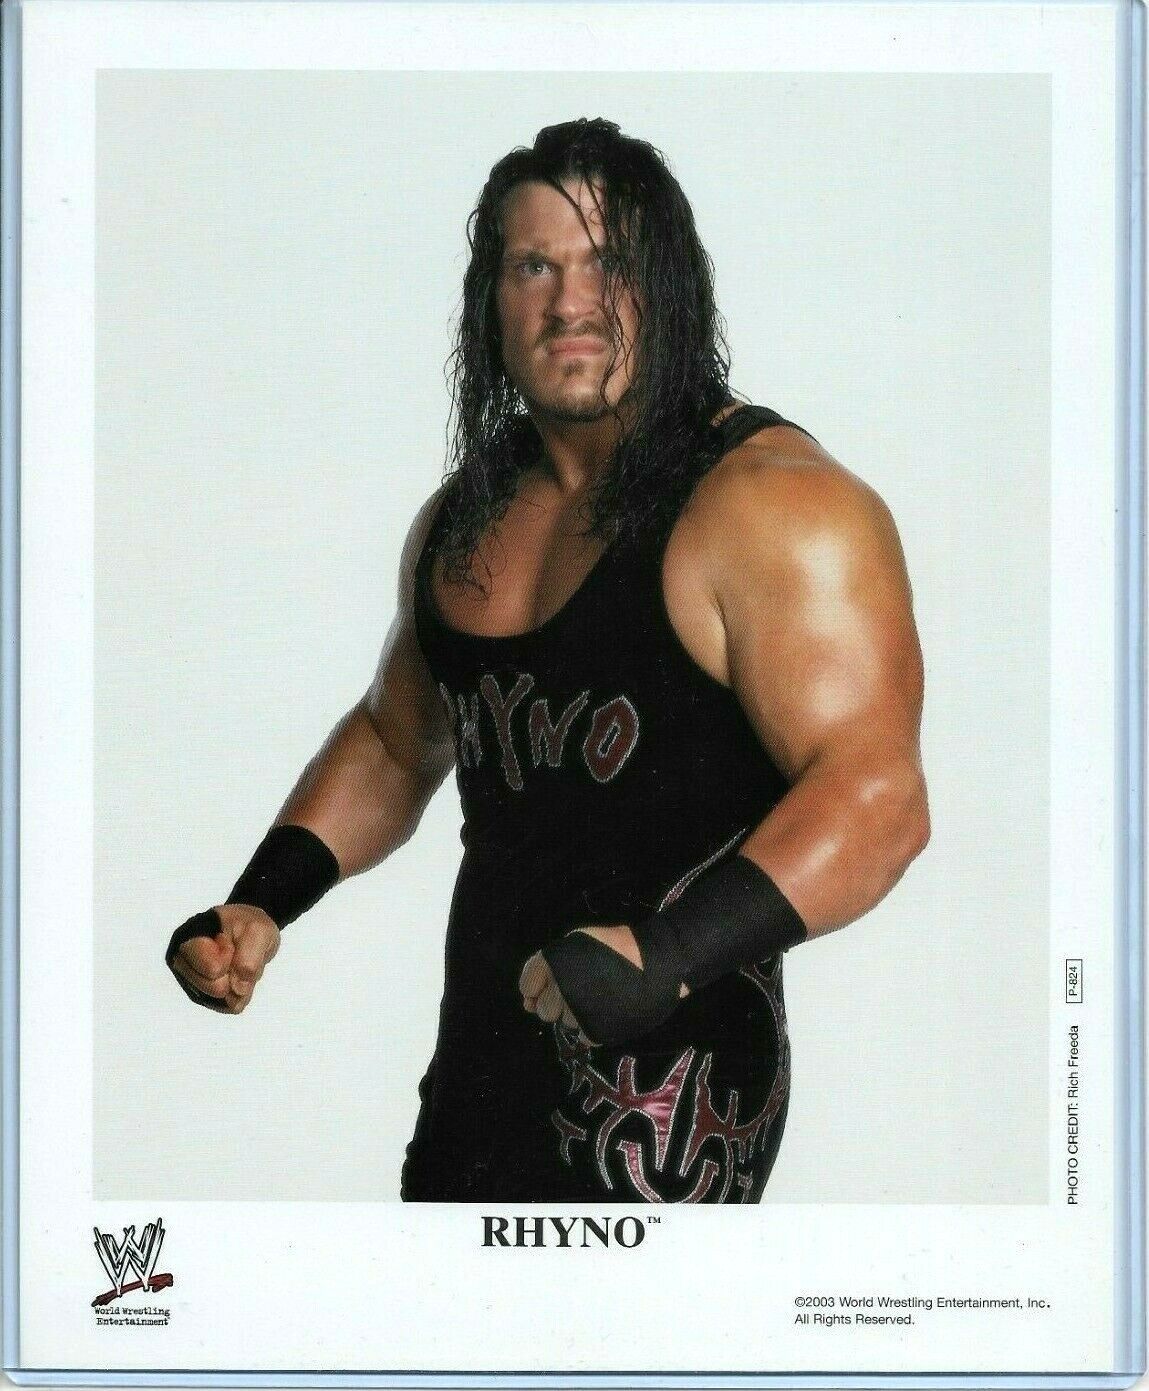 WWE RHYNO P-824 OFFICIAL LICENSED AUTHENTIC ORIGINAL 8X10 PROMO Photo Poster painting RARE